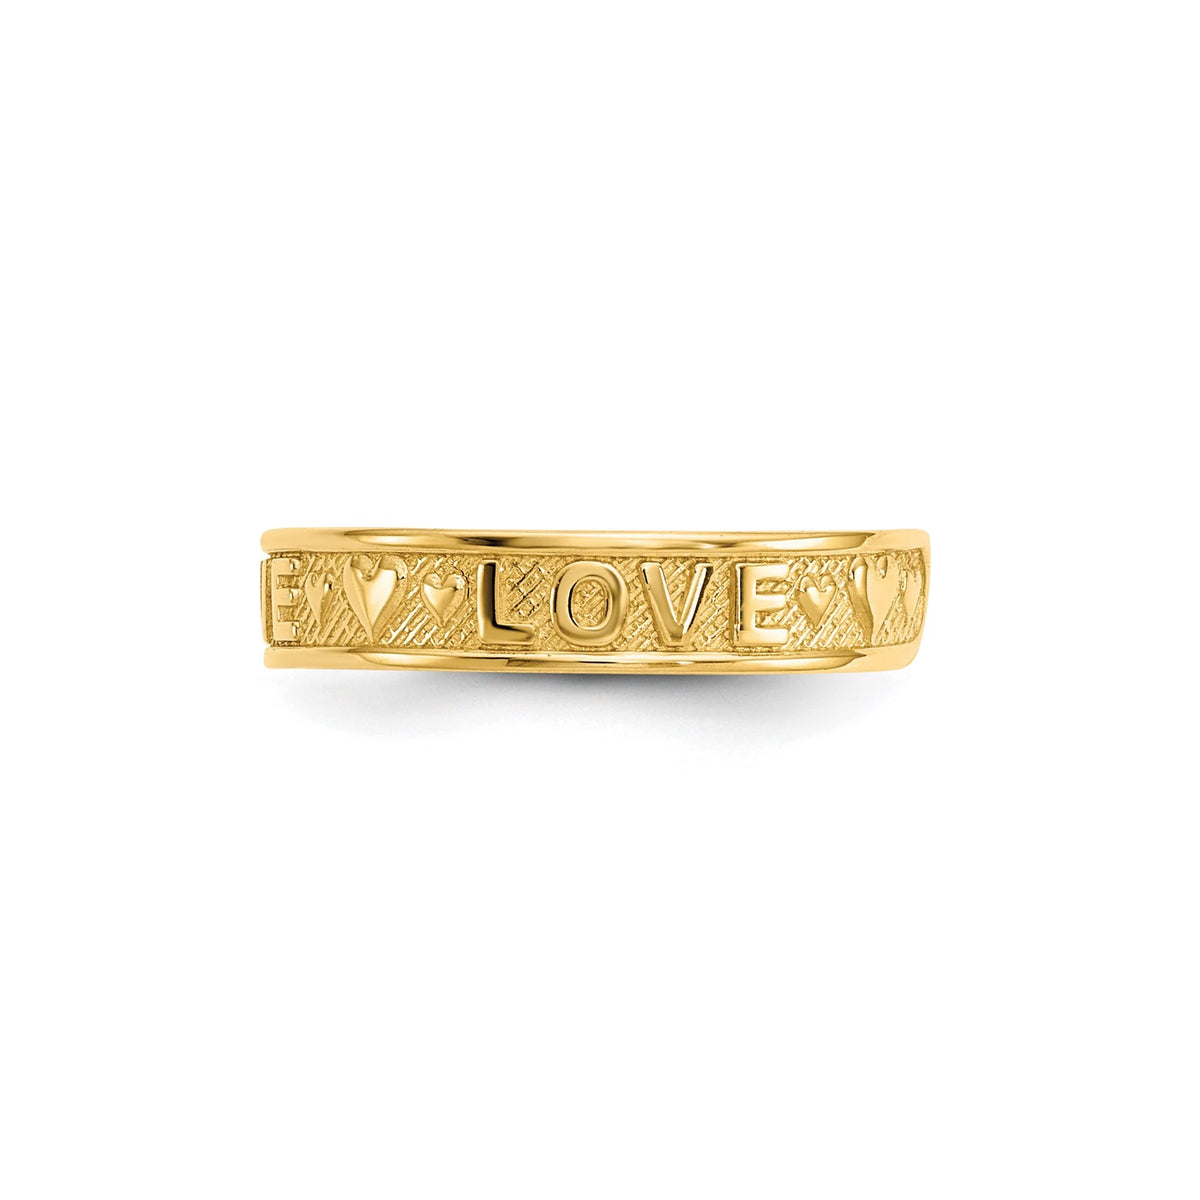 14k Yellow Gold LOVE and Hearts Toe Ring 3mm Band- Gift Box Included - Made in U.S.A.